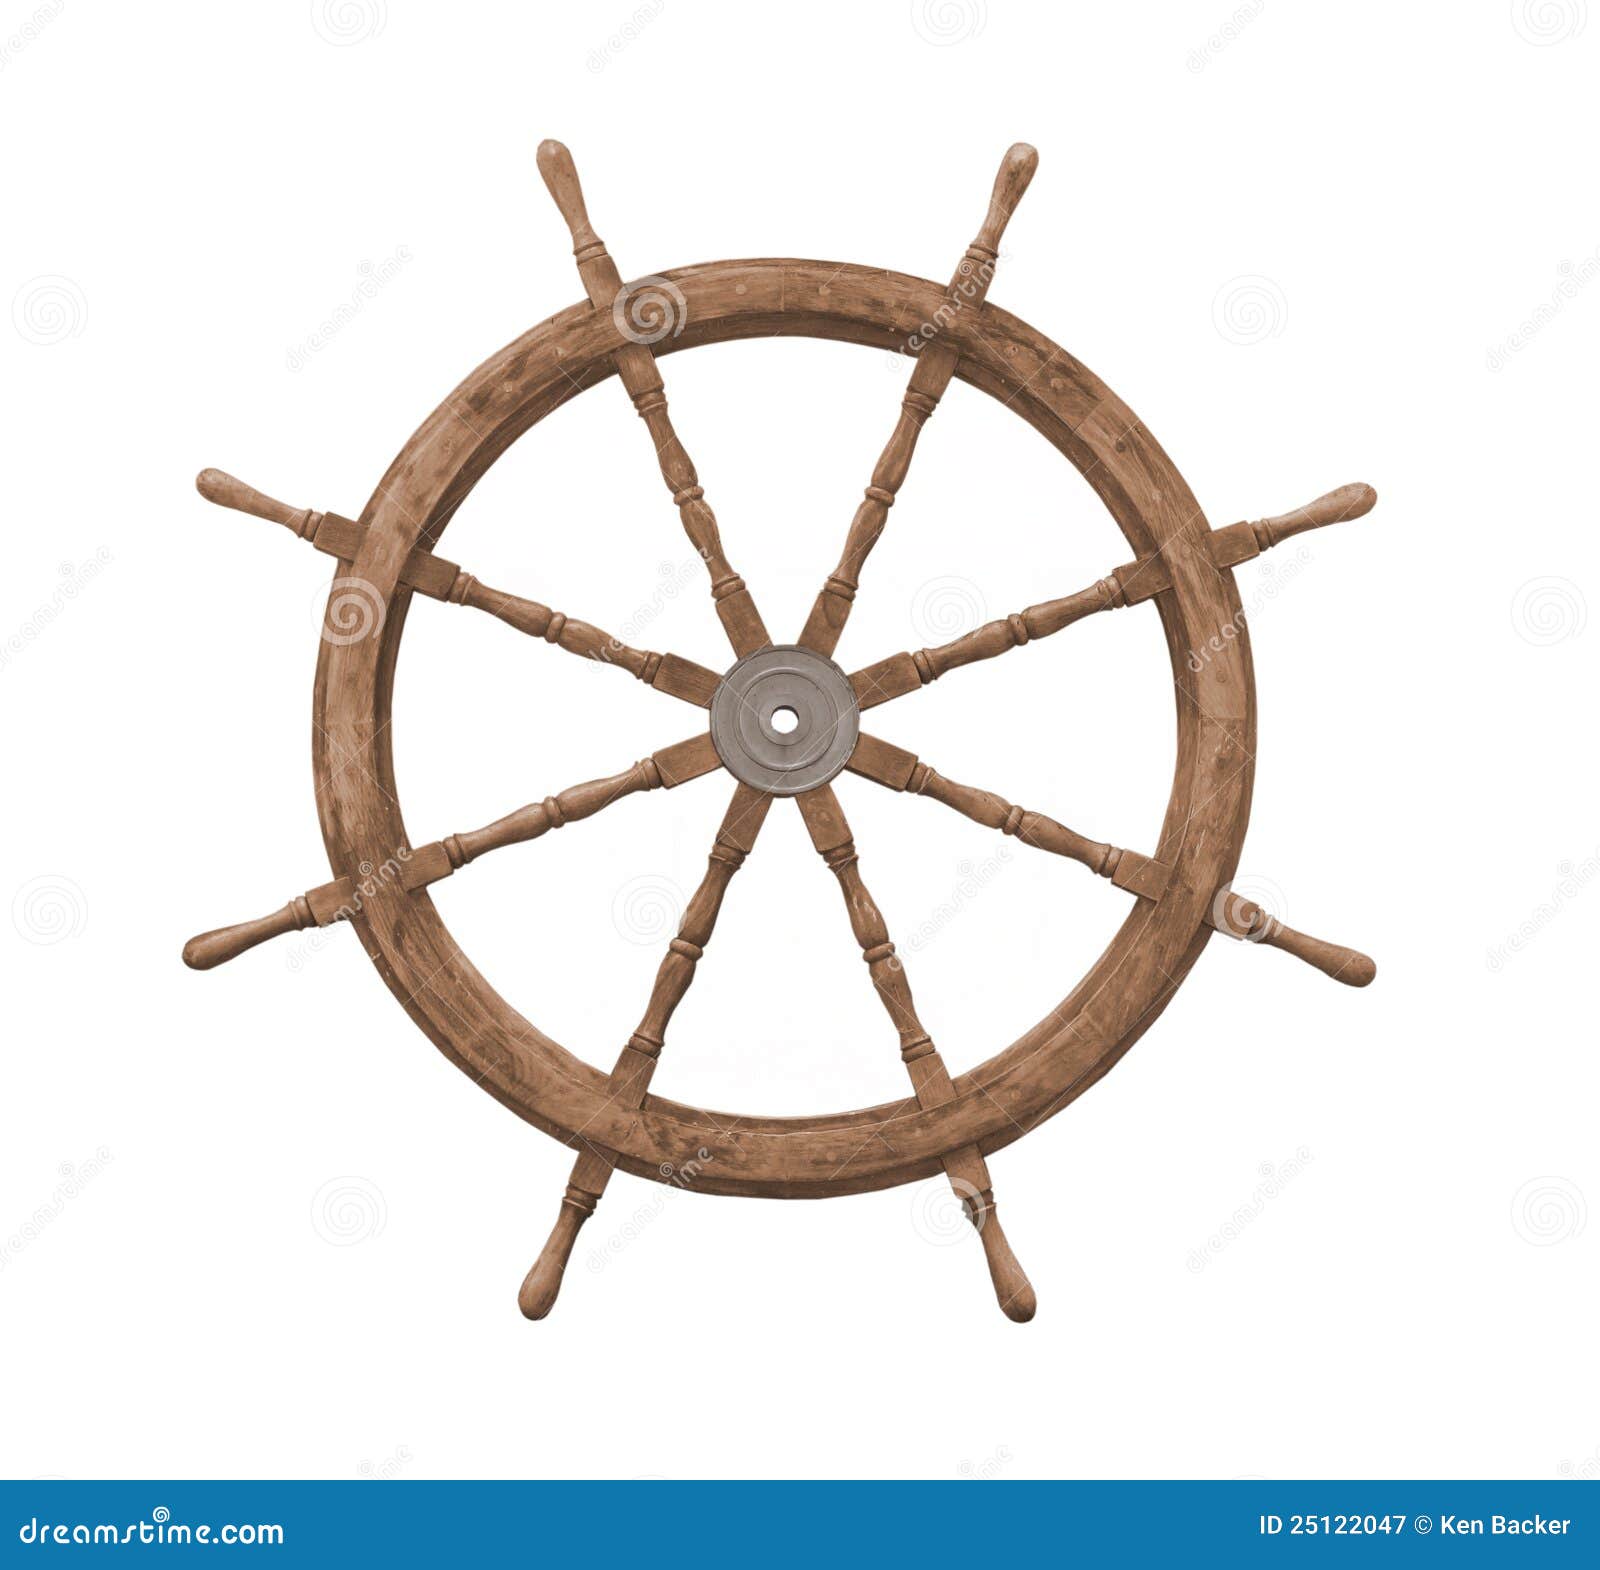  and worn, large steering wheel from a sailing ship. Isolated on white